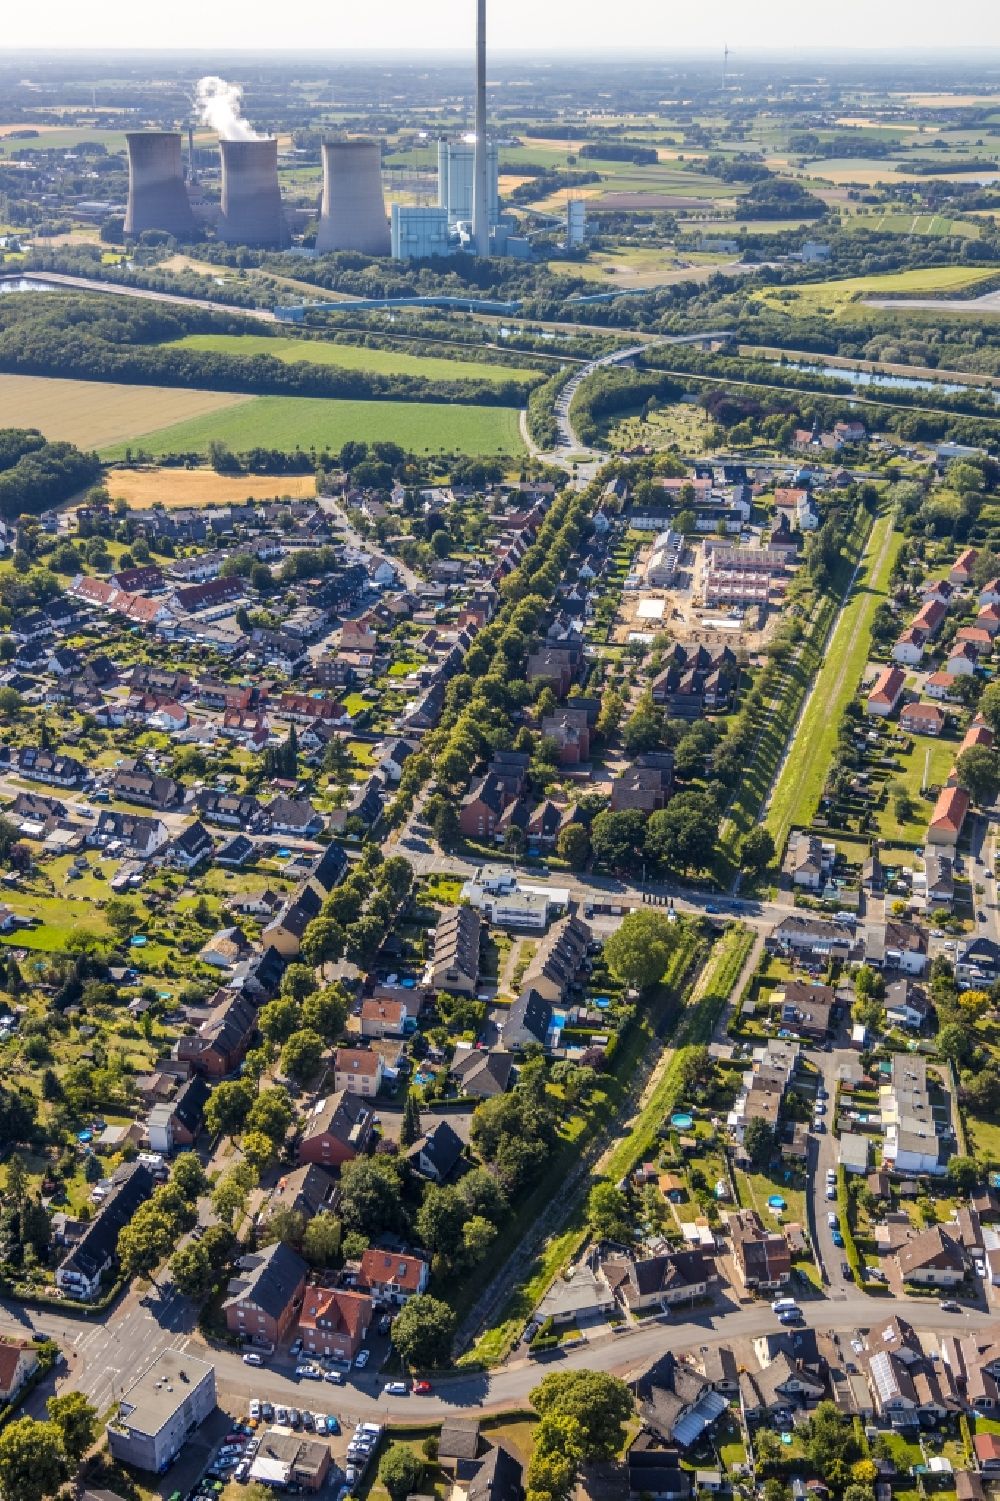 Aerial image Hamm - Construction site of a new residential area of the terraced housing estate Zum Torksfeld in the district Herringen in Hamm in the state North Rhine-Westphalia, Germany